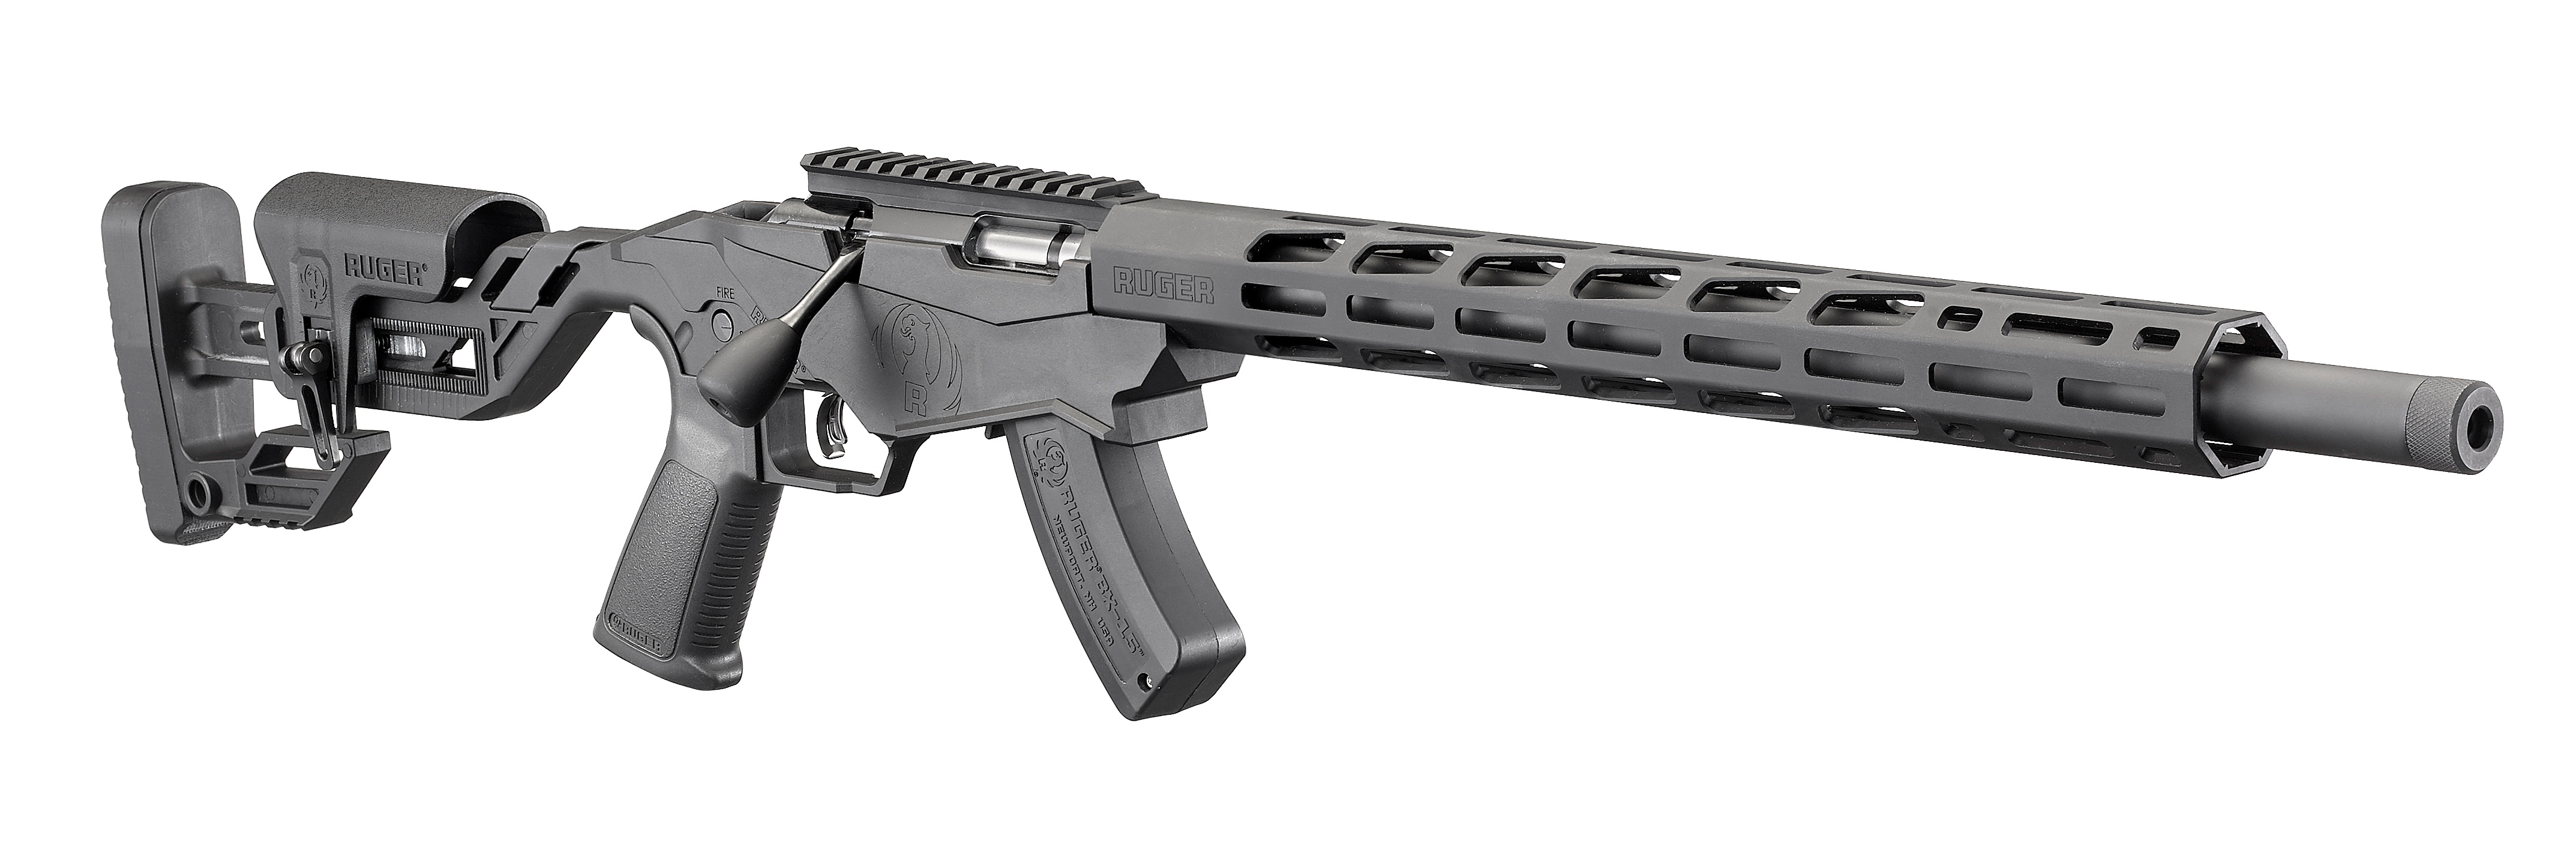 Ruger Introduces Precision Rimfire Rifle